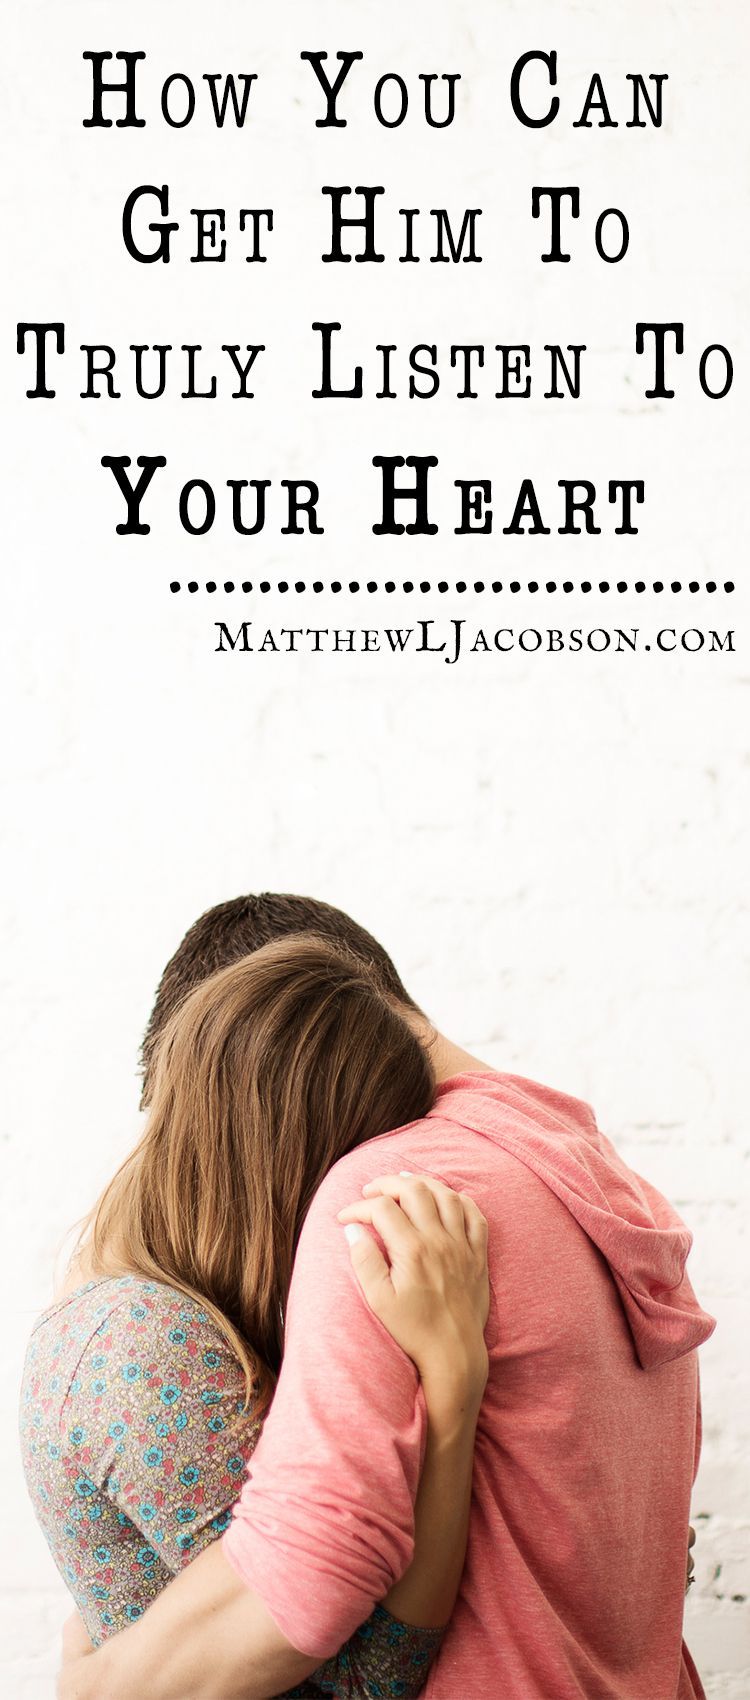 Here’s how you can help him to hear your heart. . . .